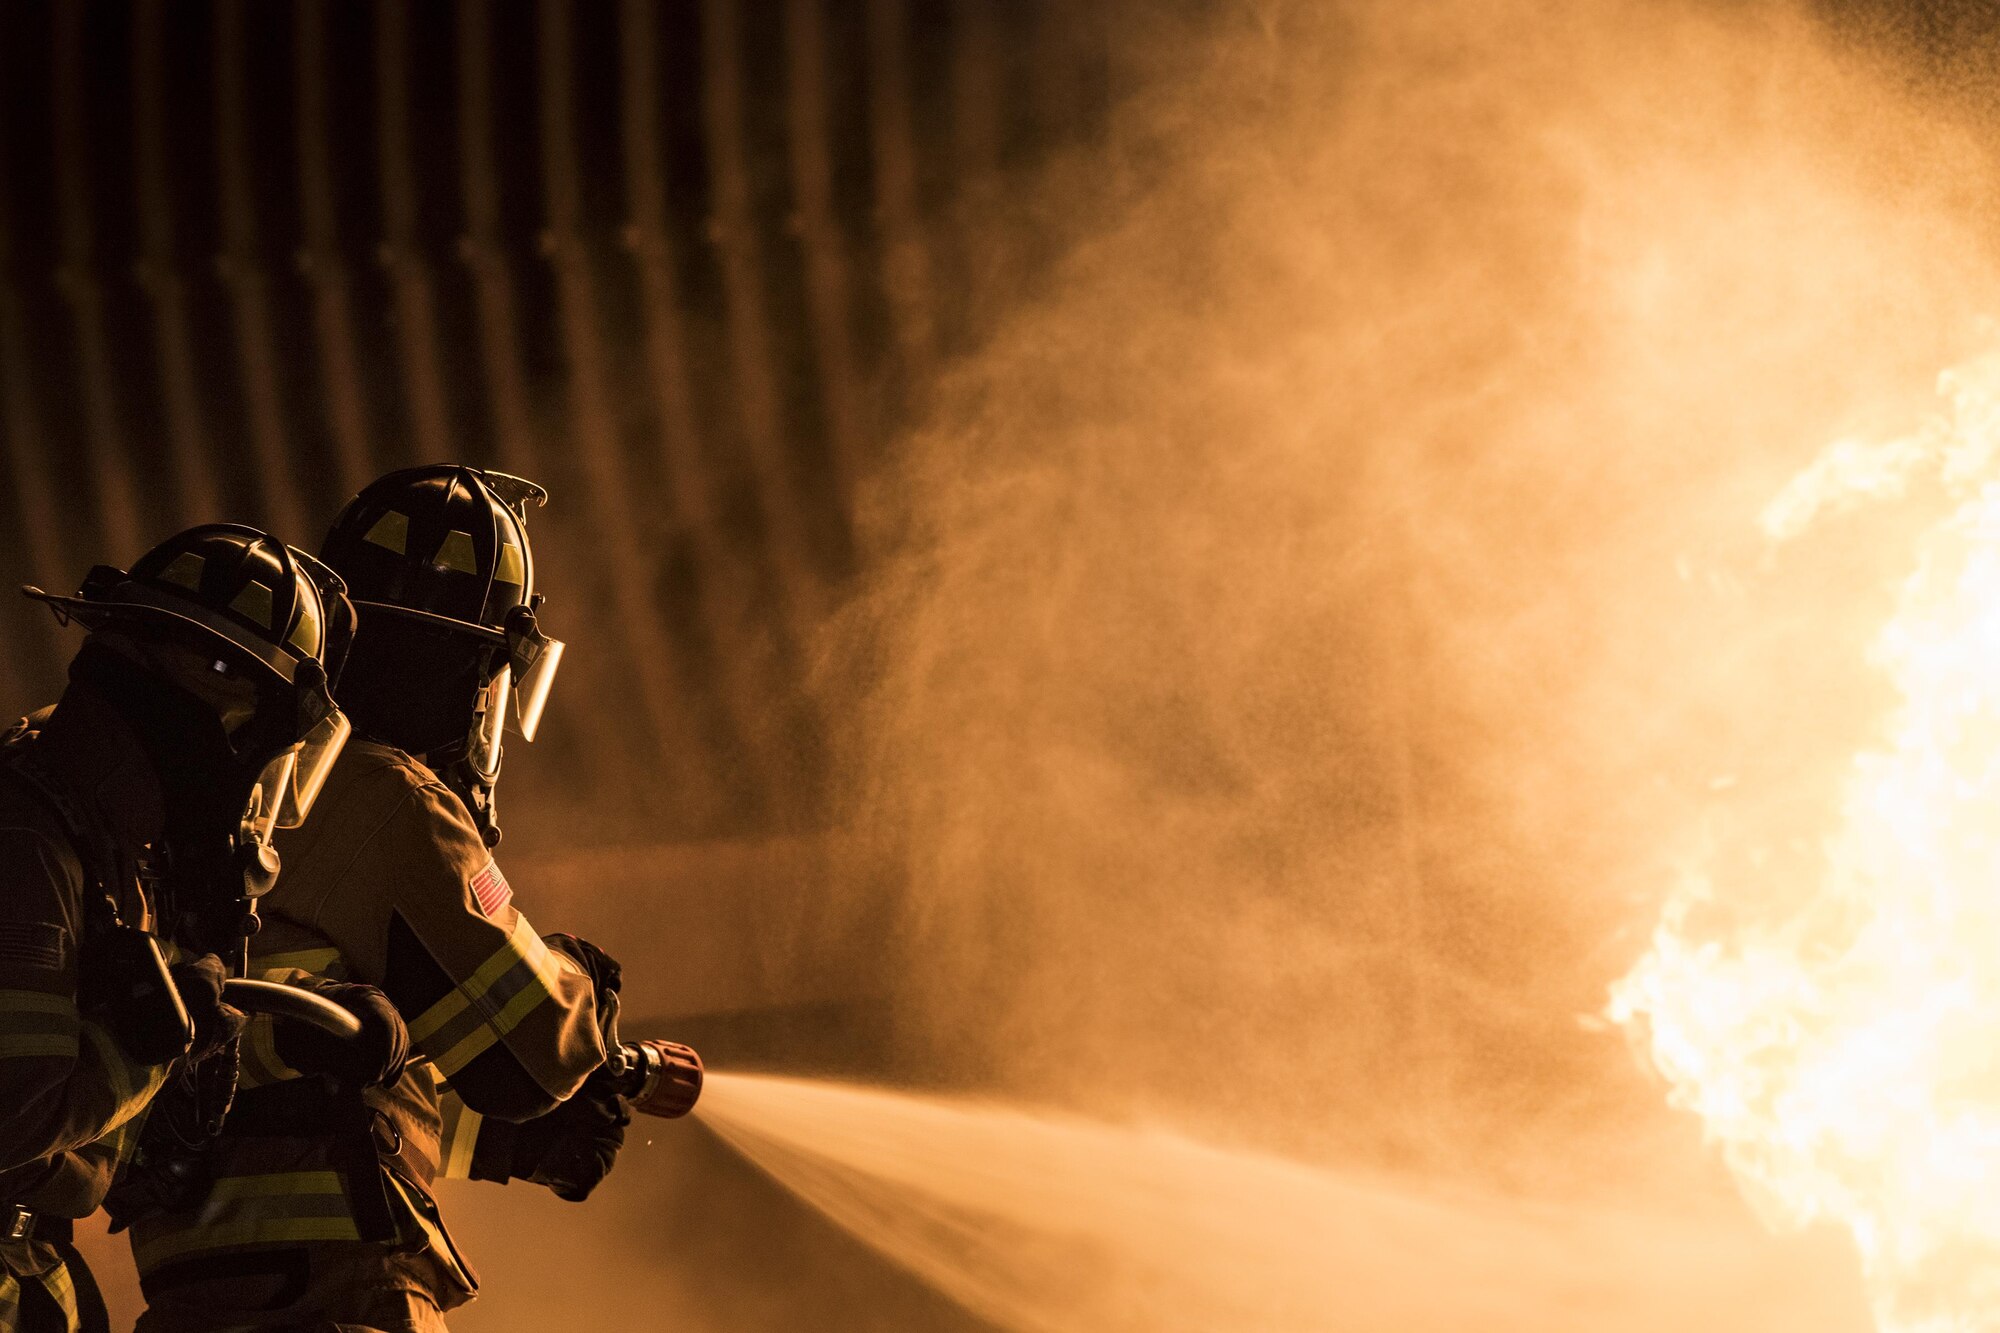 Firefighters from the 23d Civil Engineer Squadron extinguish a flame during nighttime, live-fire training, Jan. 10, 2017, at Moody Air Force Base, Ga. This training is an annual requirement for Moody firefighters and is just one of the ways they stay ready to protect people, property and the environment from fires and disasters. (U.S. Air Force photo by Staff Sgt. Ryan Callaghan)
